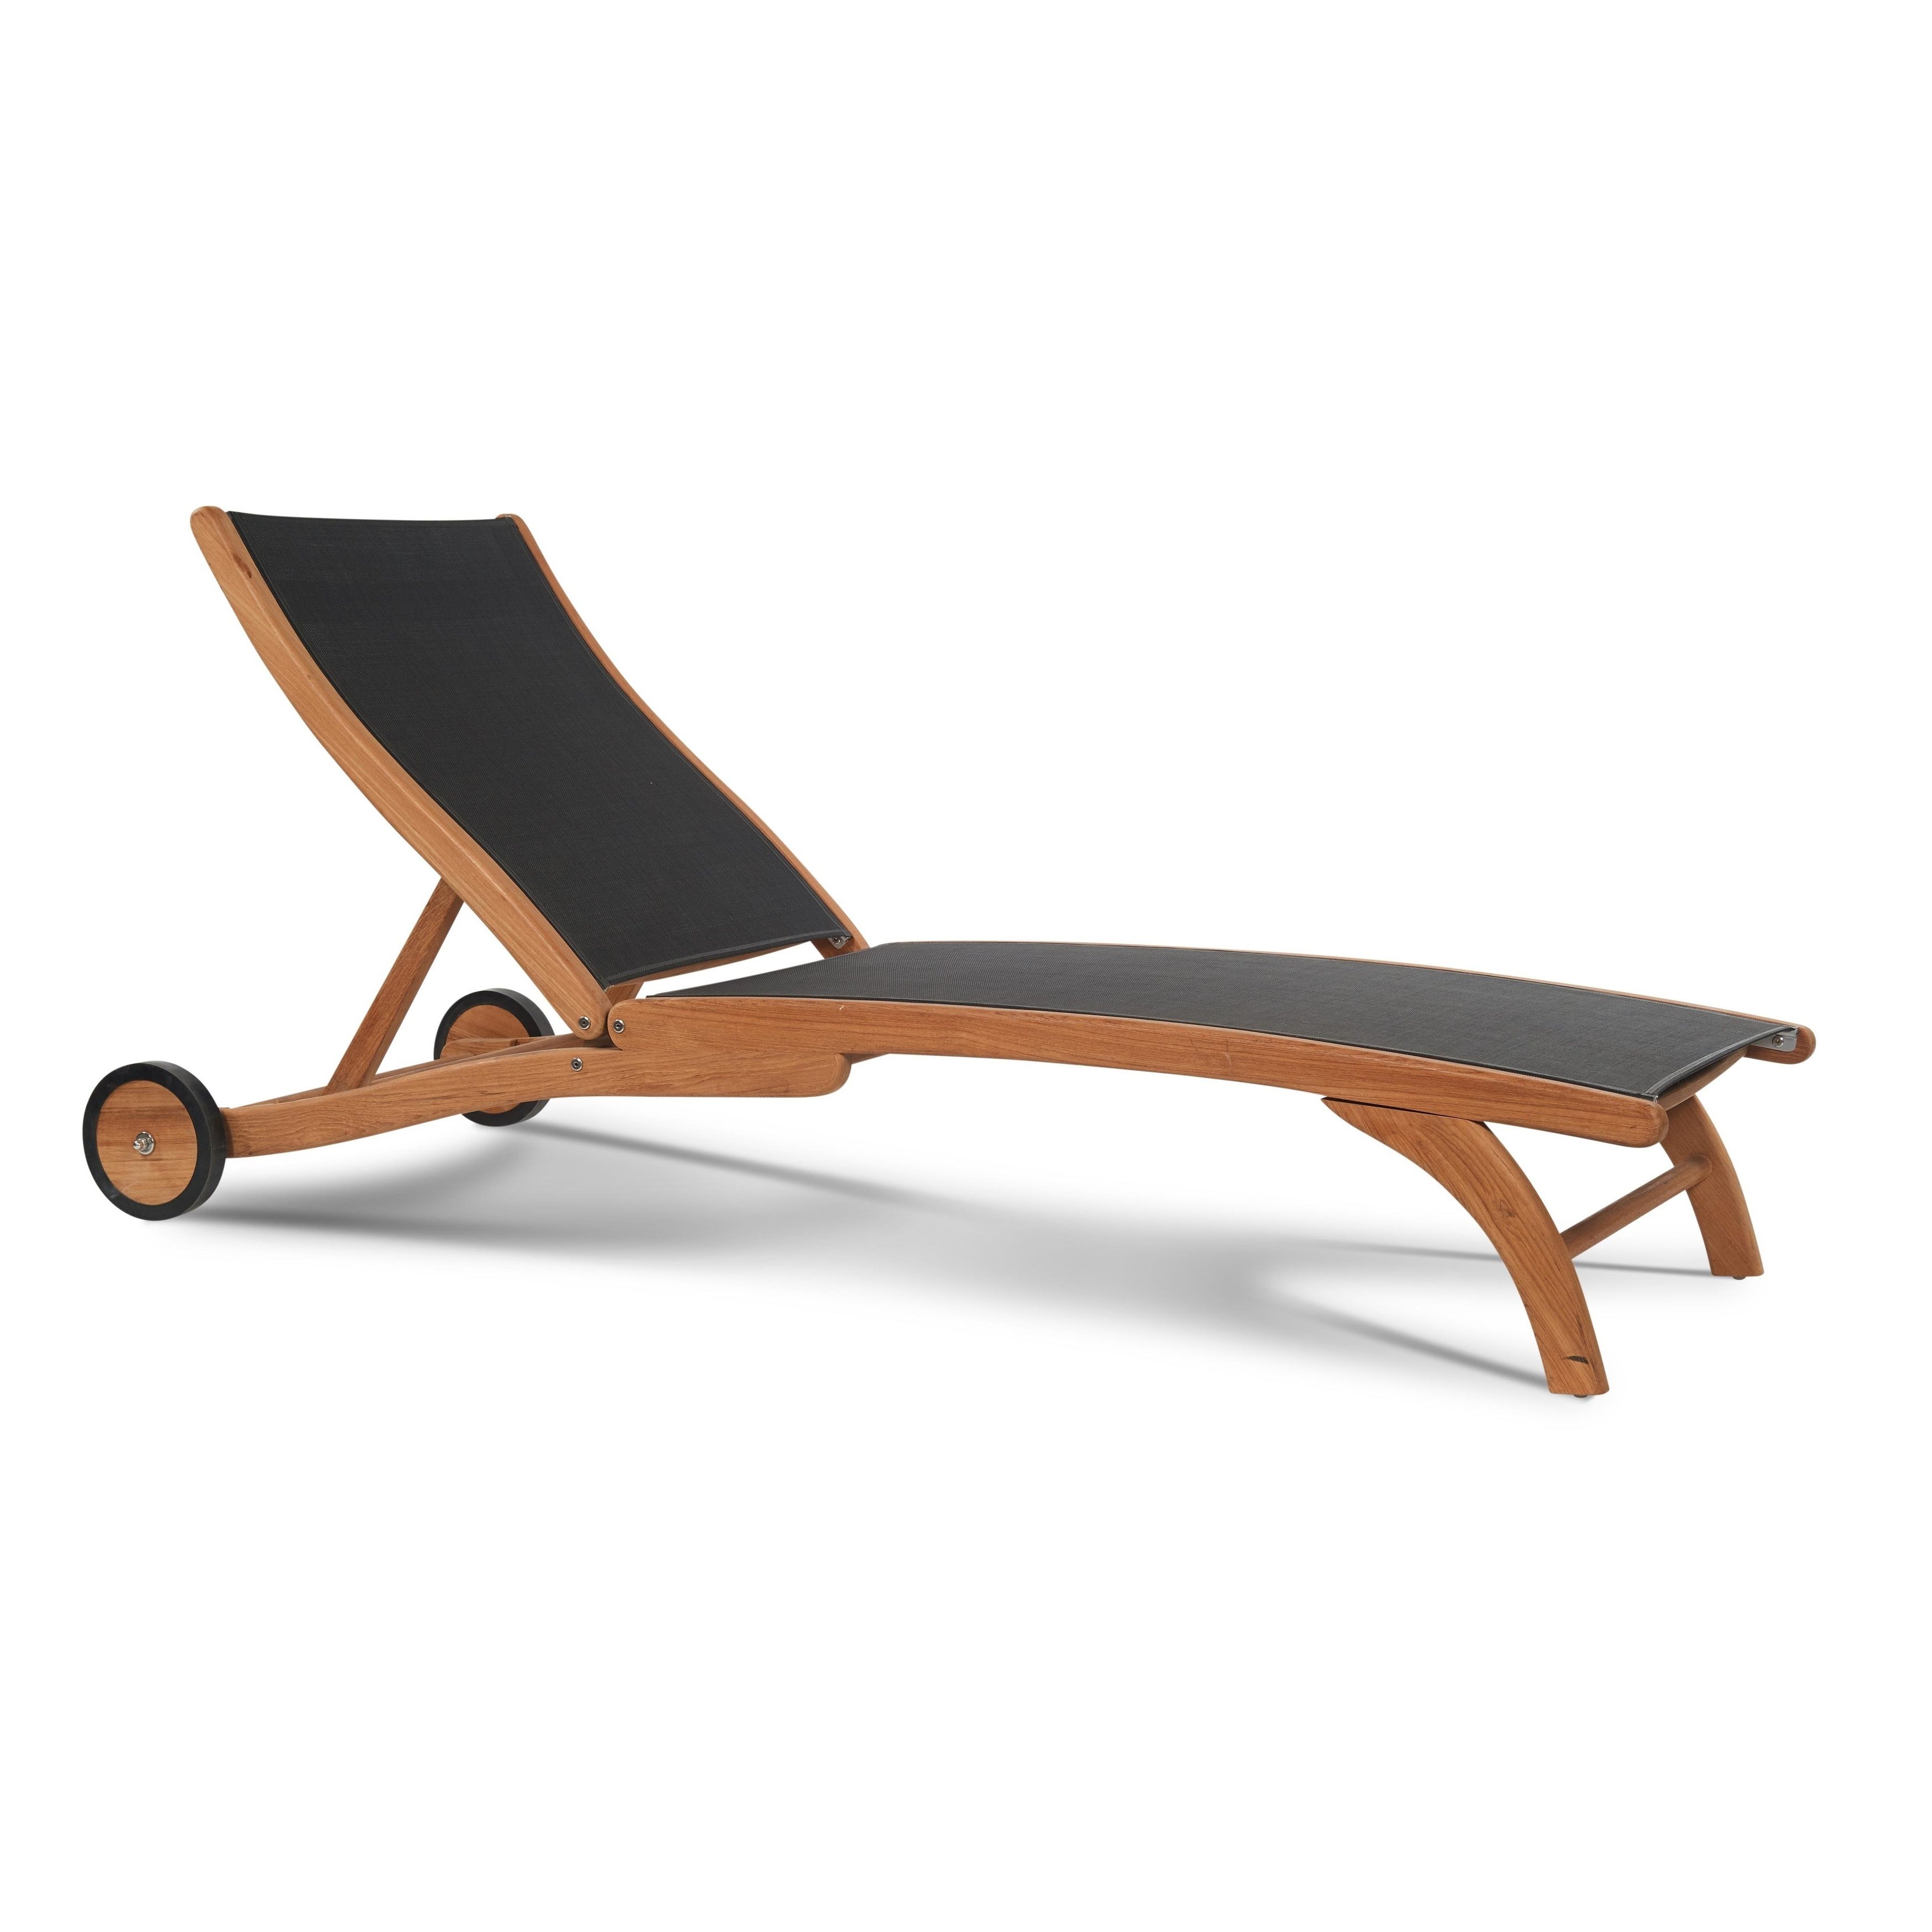 Hiteak Pearl Chaise Lounge In Black Mesh Fabric With 2020 Pearl Chaise Lounges (View 6 of 25)